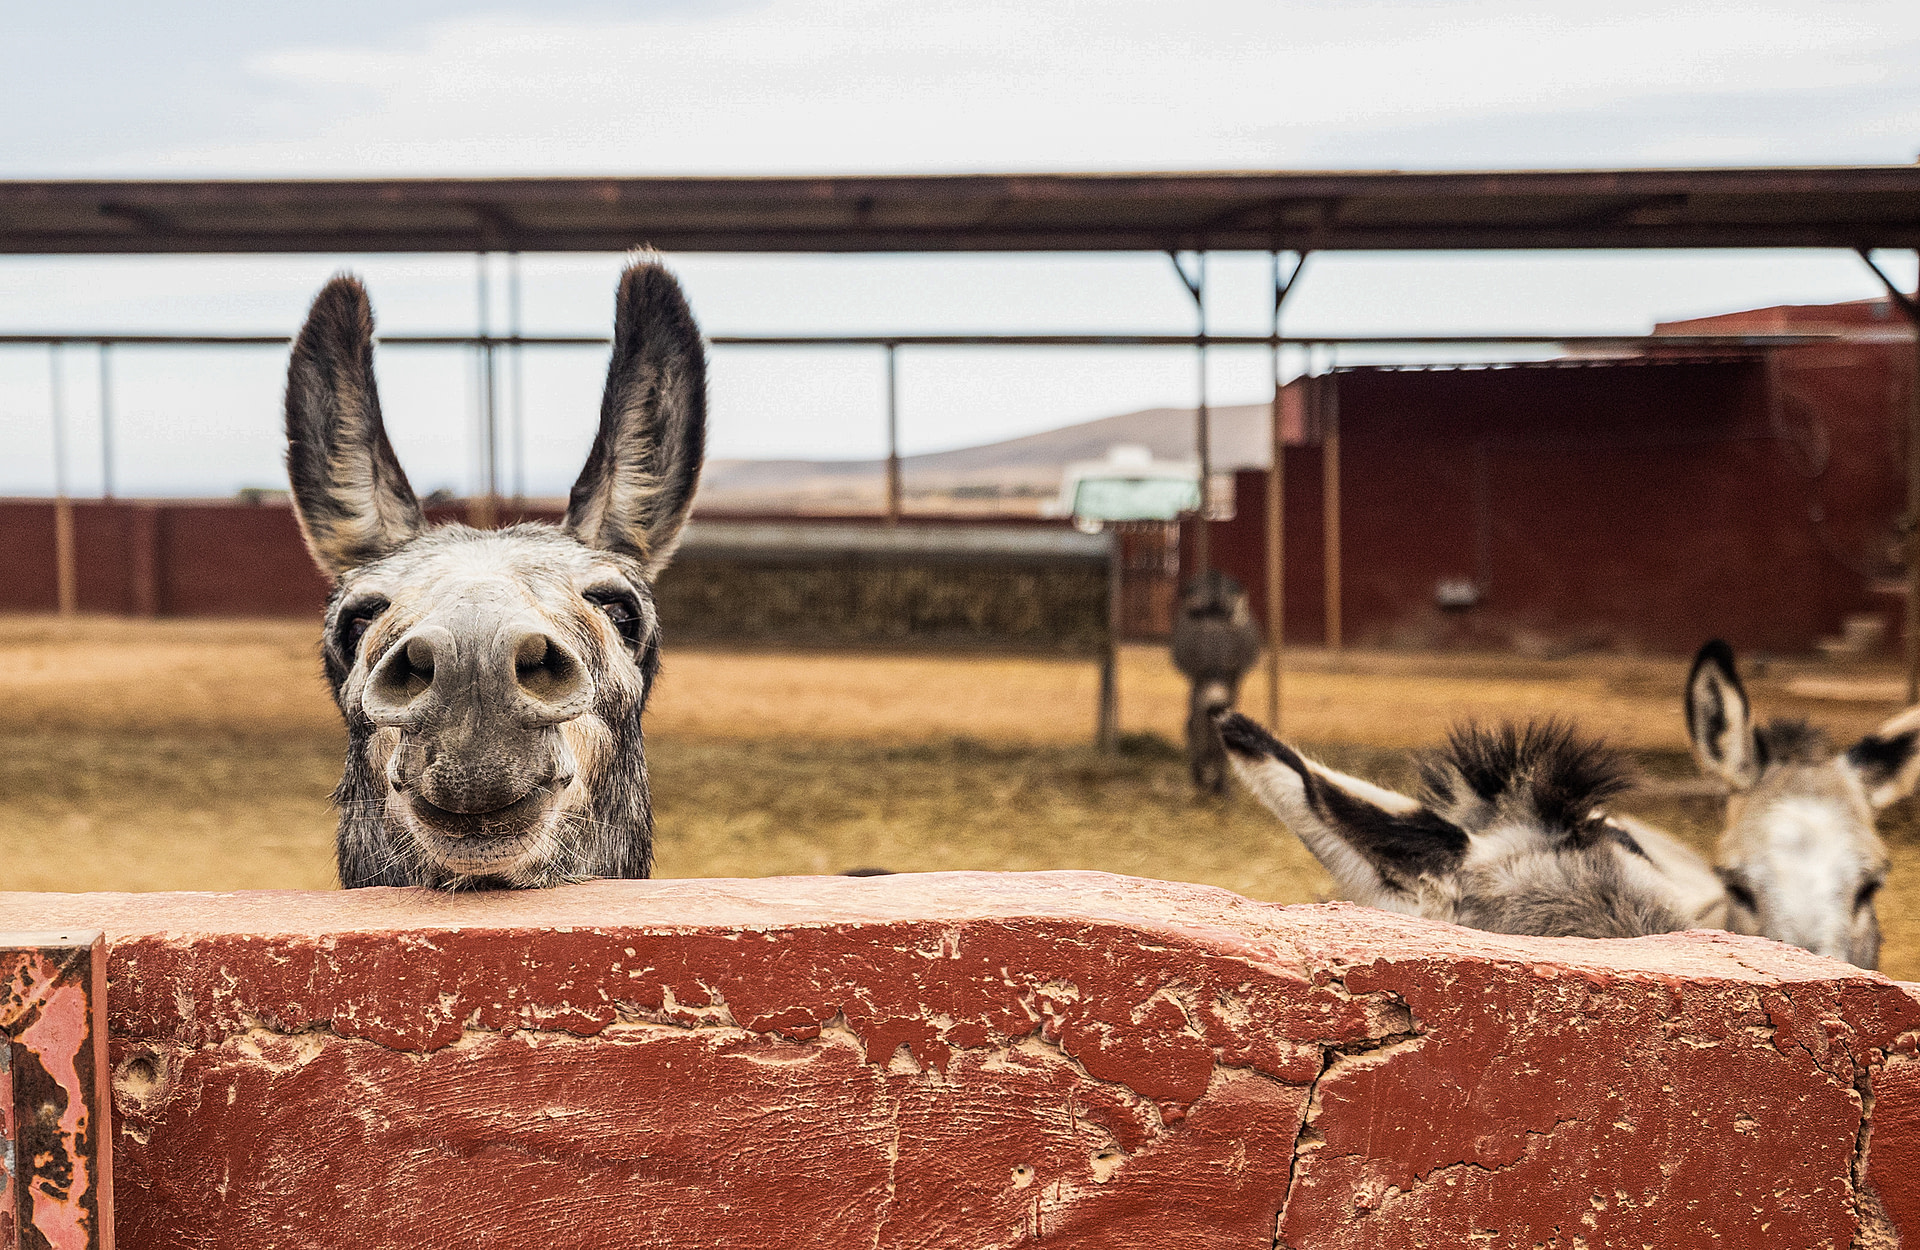 Rescue donkey Curro peeks over the fence to greet visitors entering The Animal Academy sanctuary in Fuerteventura, Spain. Curro was a family pet in a house until his size meant they could no longer care for him - in fact, Curro still prefers the company of humans to his fellow donkeys! Spain, 2022. Andrew Skowron / We Animals Media